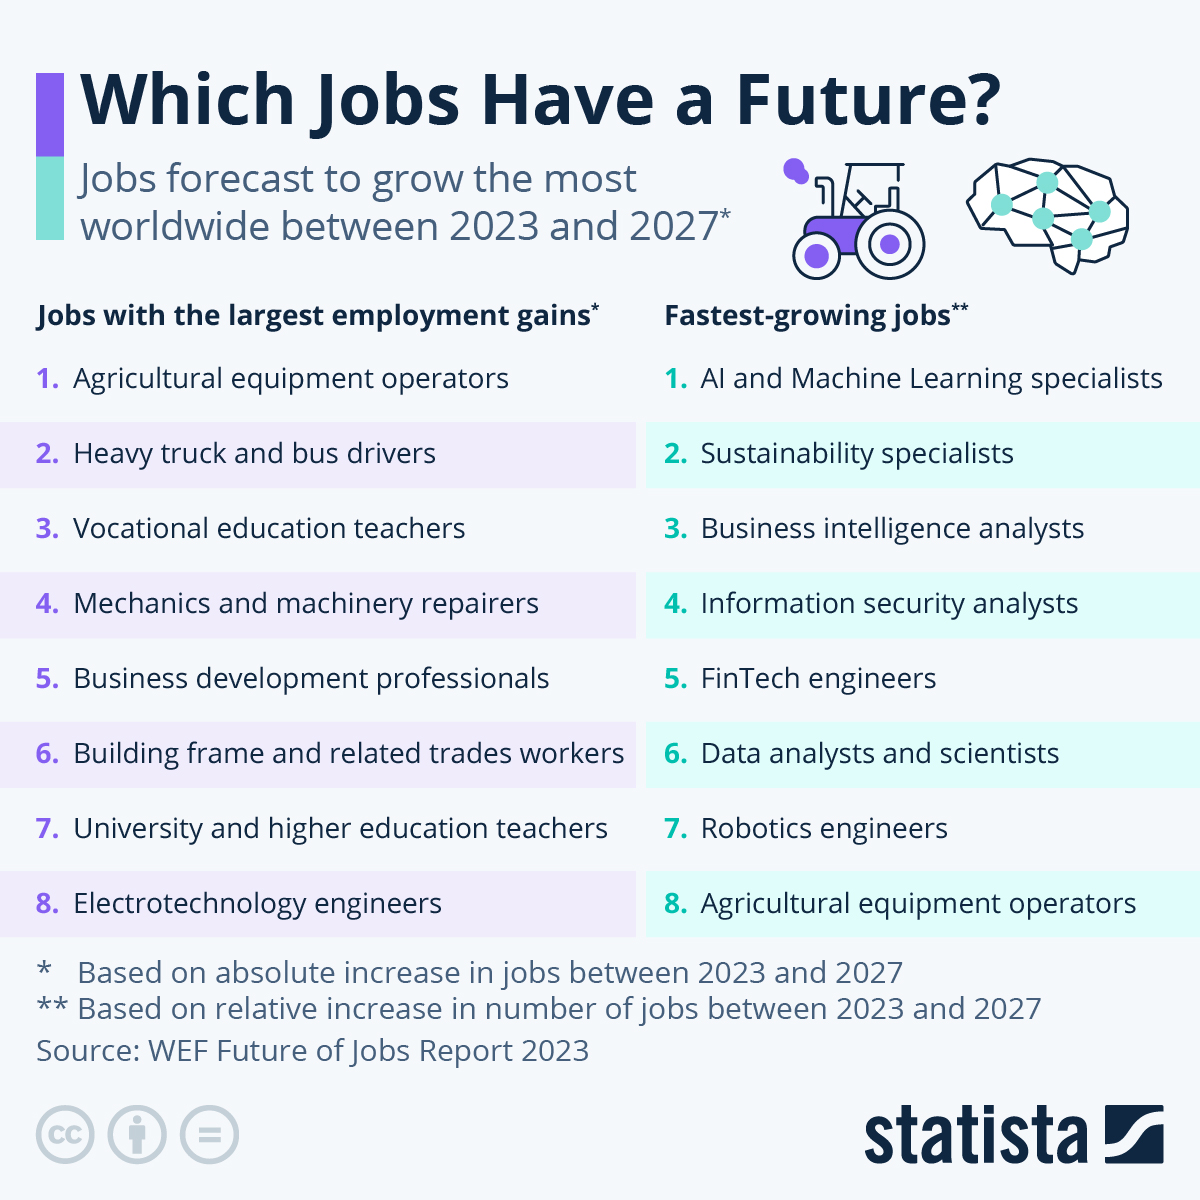 17 Most In-Demand Jobs for the Future - TechStartups